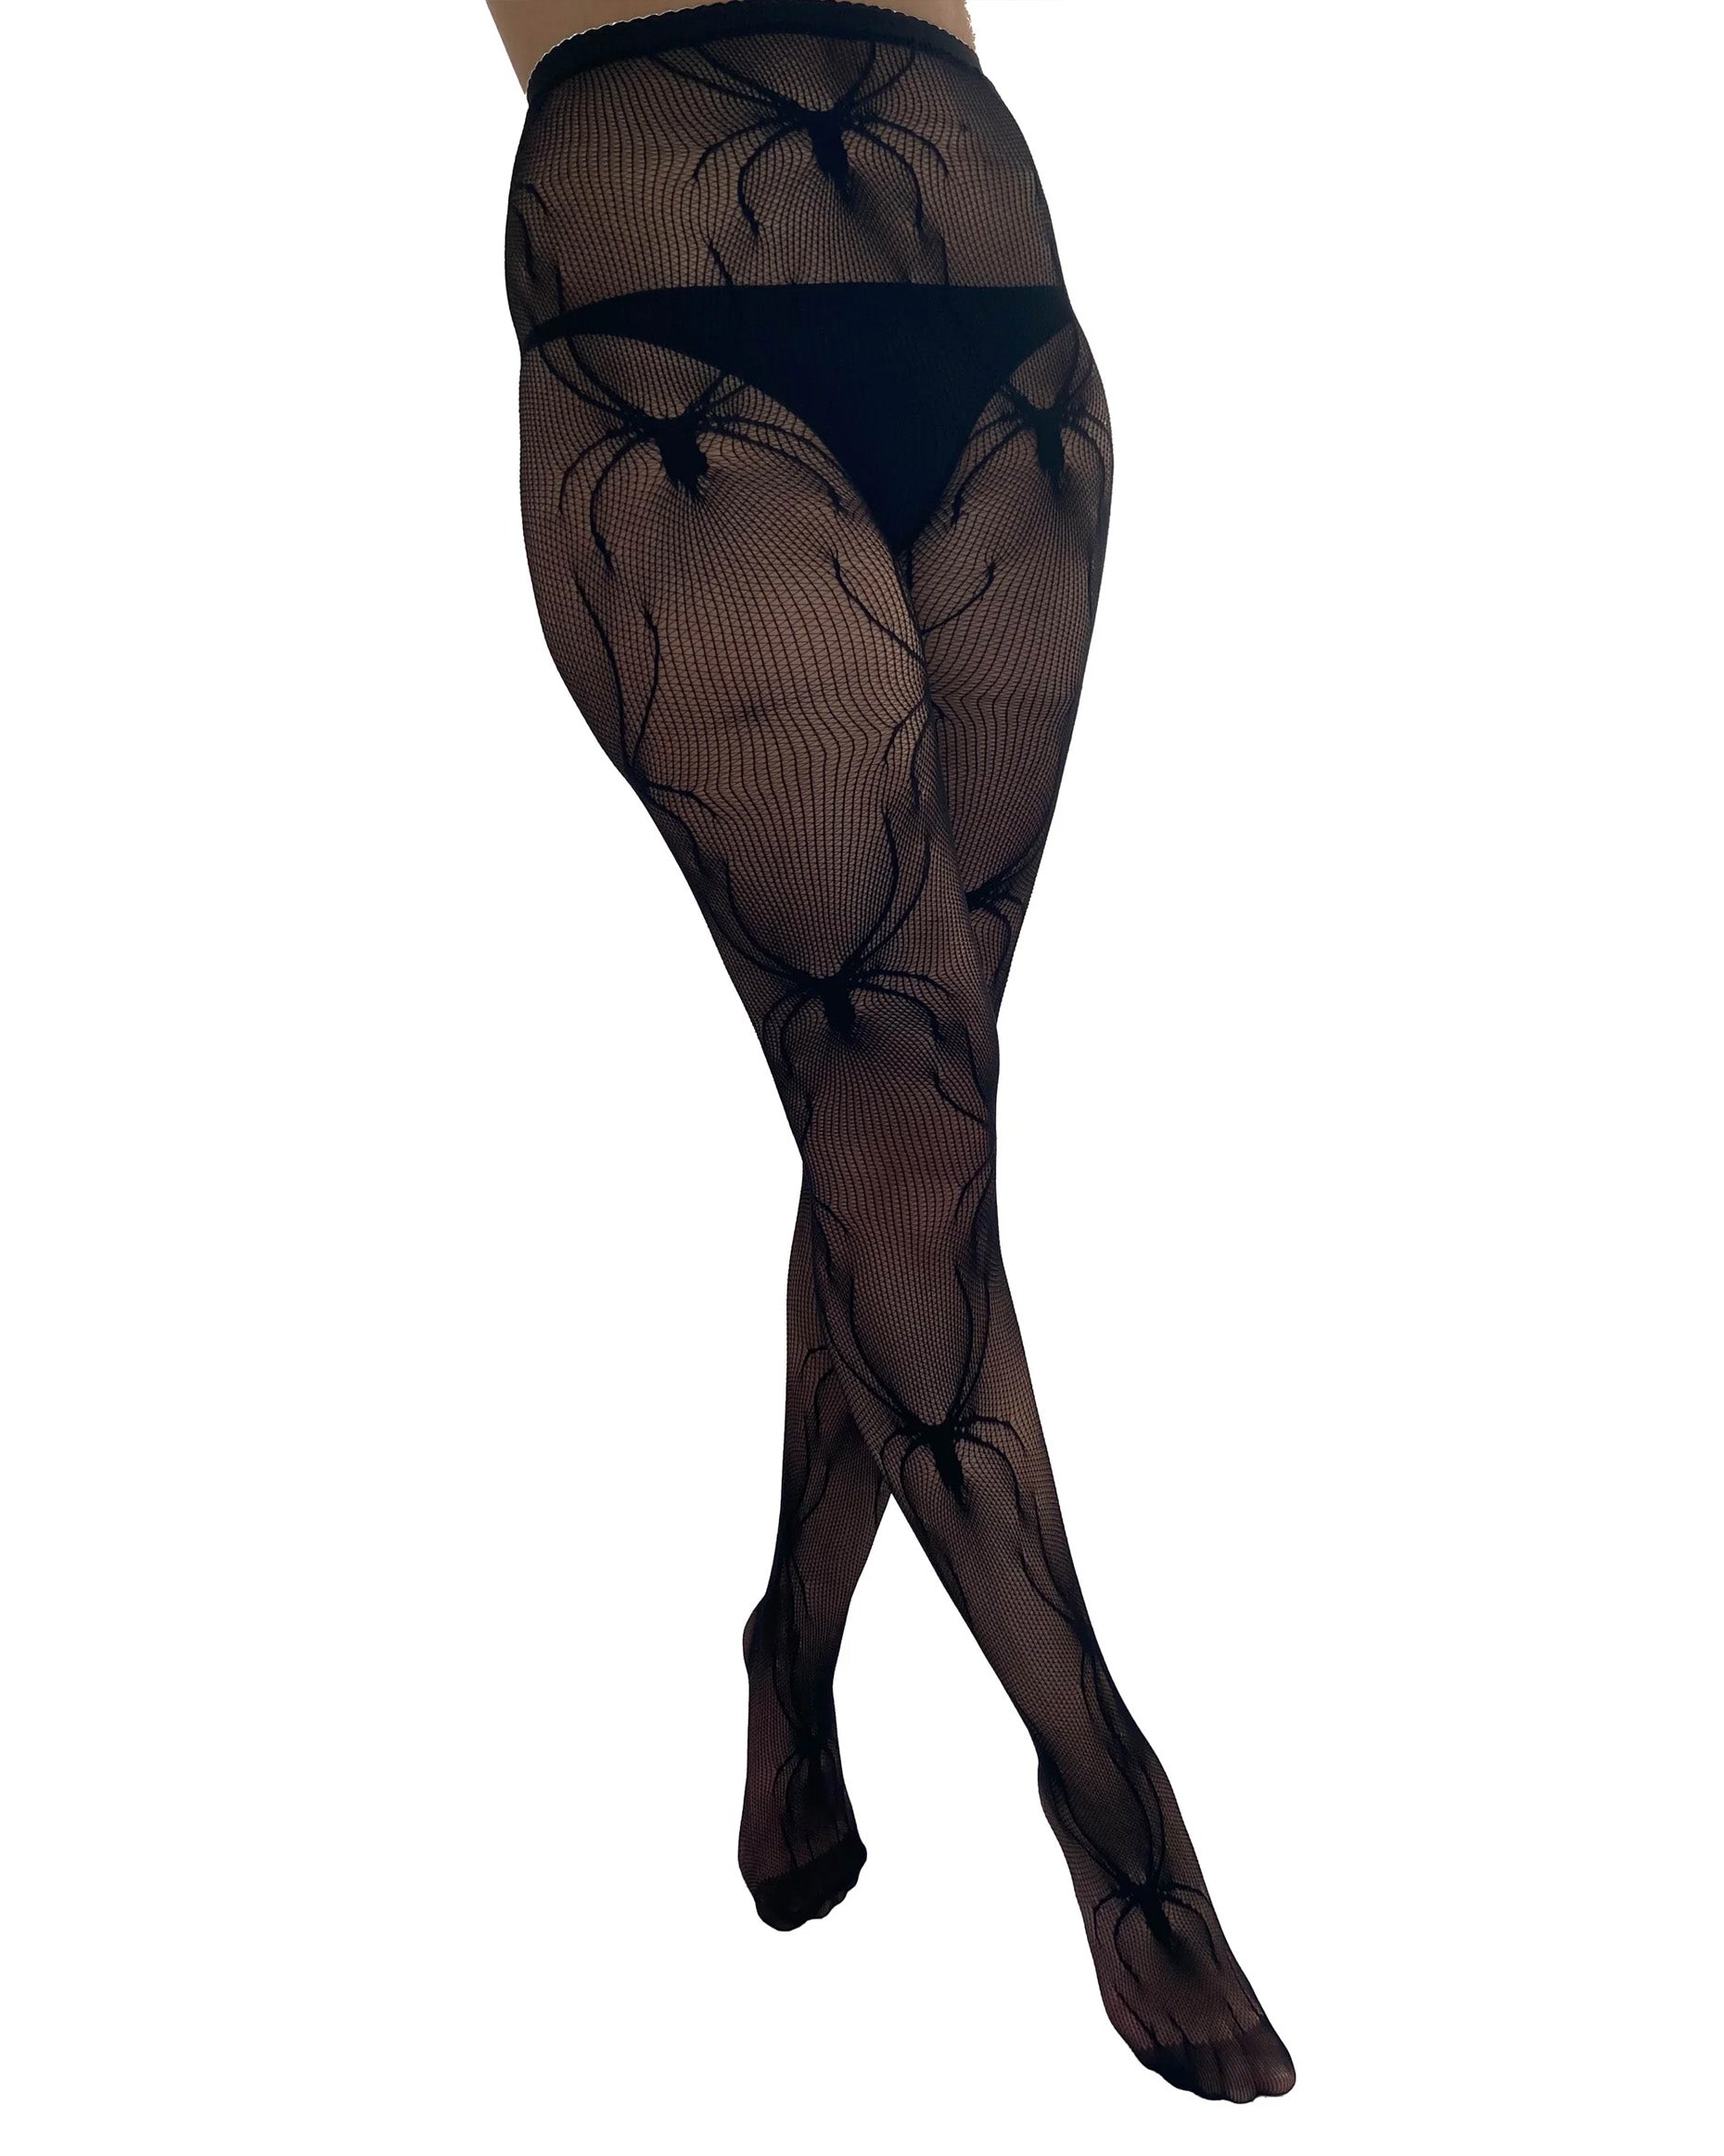 Pamela Mann Spider Net Tights - Black openwork fishnet tights with an all over spider design with seamless top.